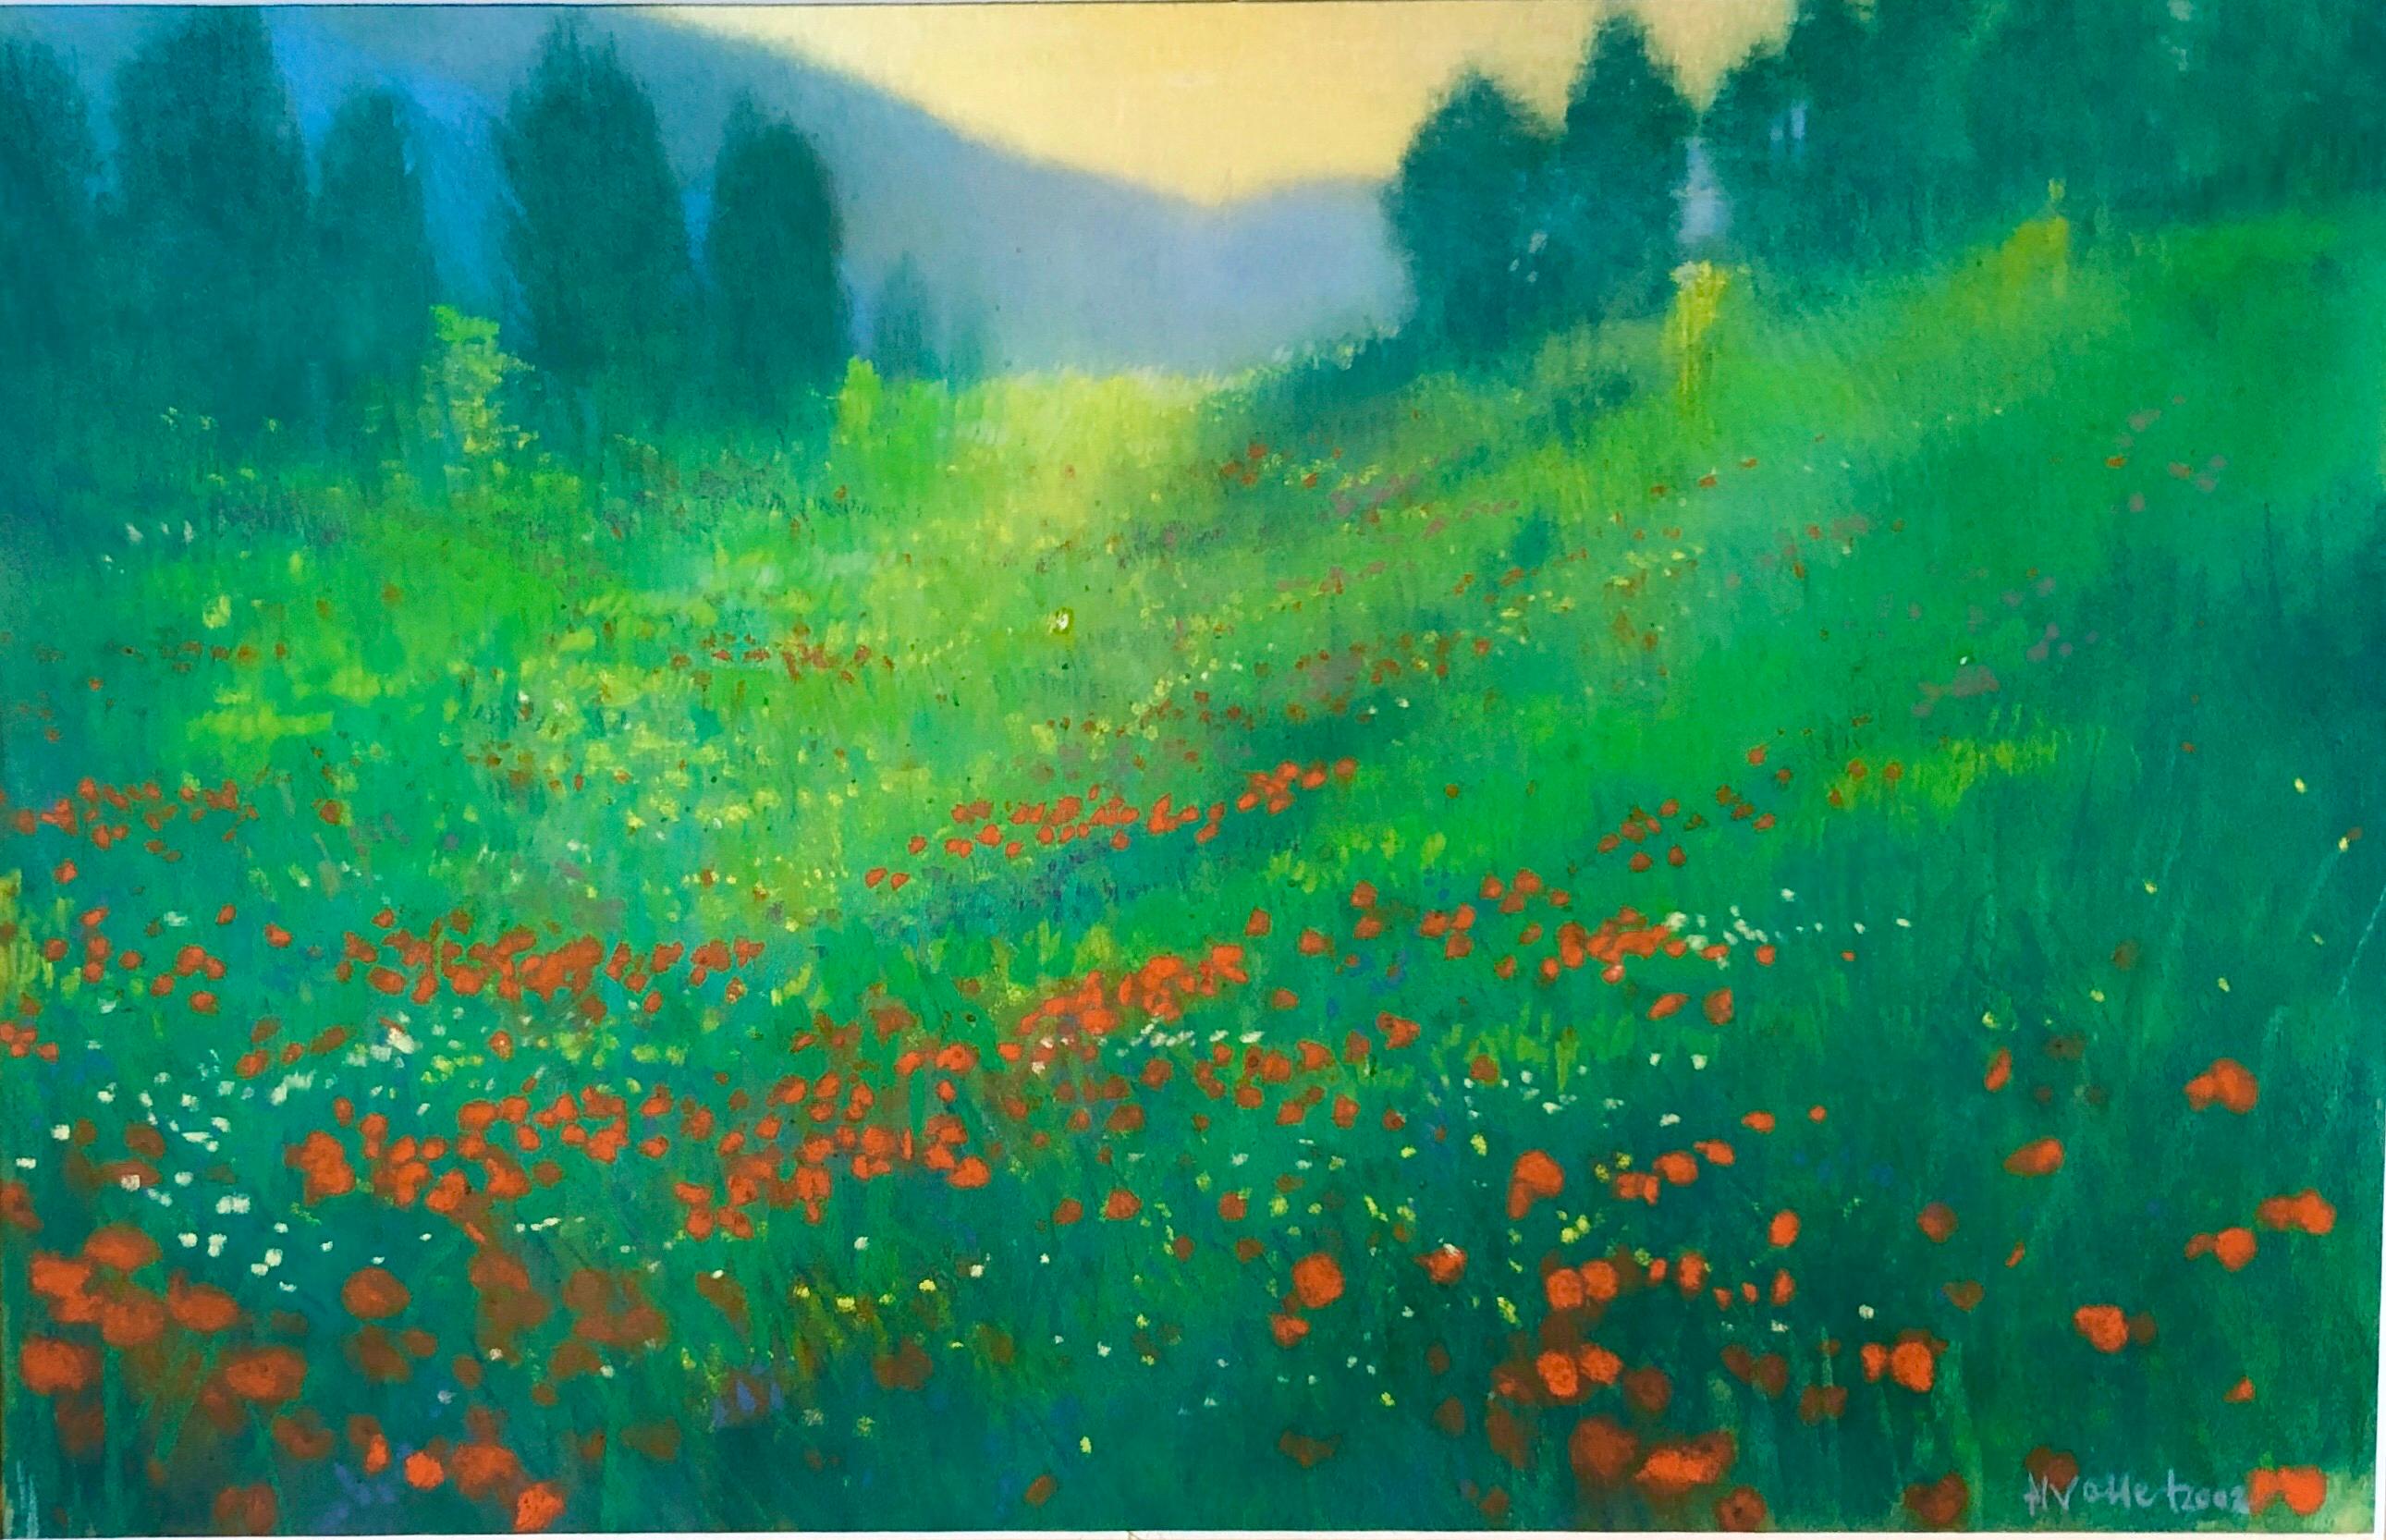 Kuno Vollet Landscape Painting - German Contemporary Pastel Painting Radiant Landscape Field with Flowers Poppies